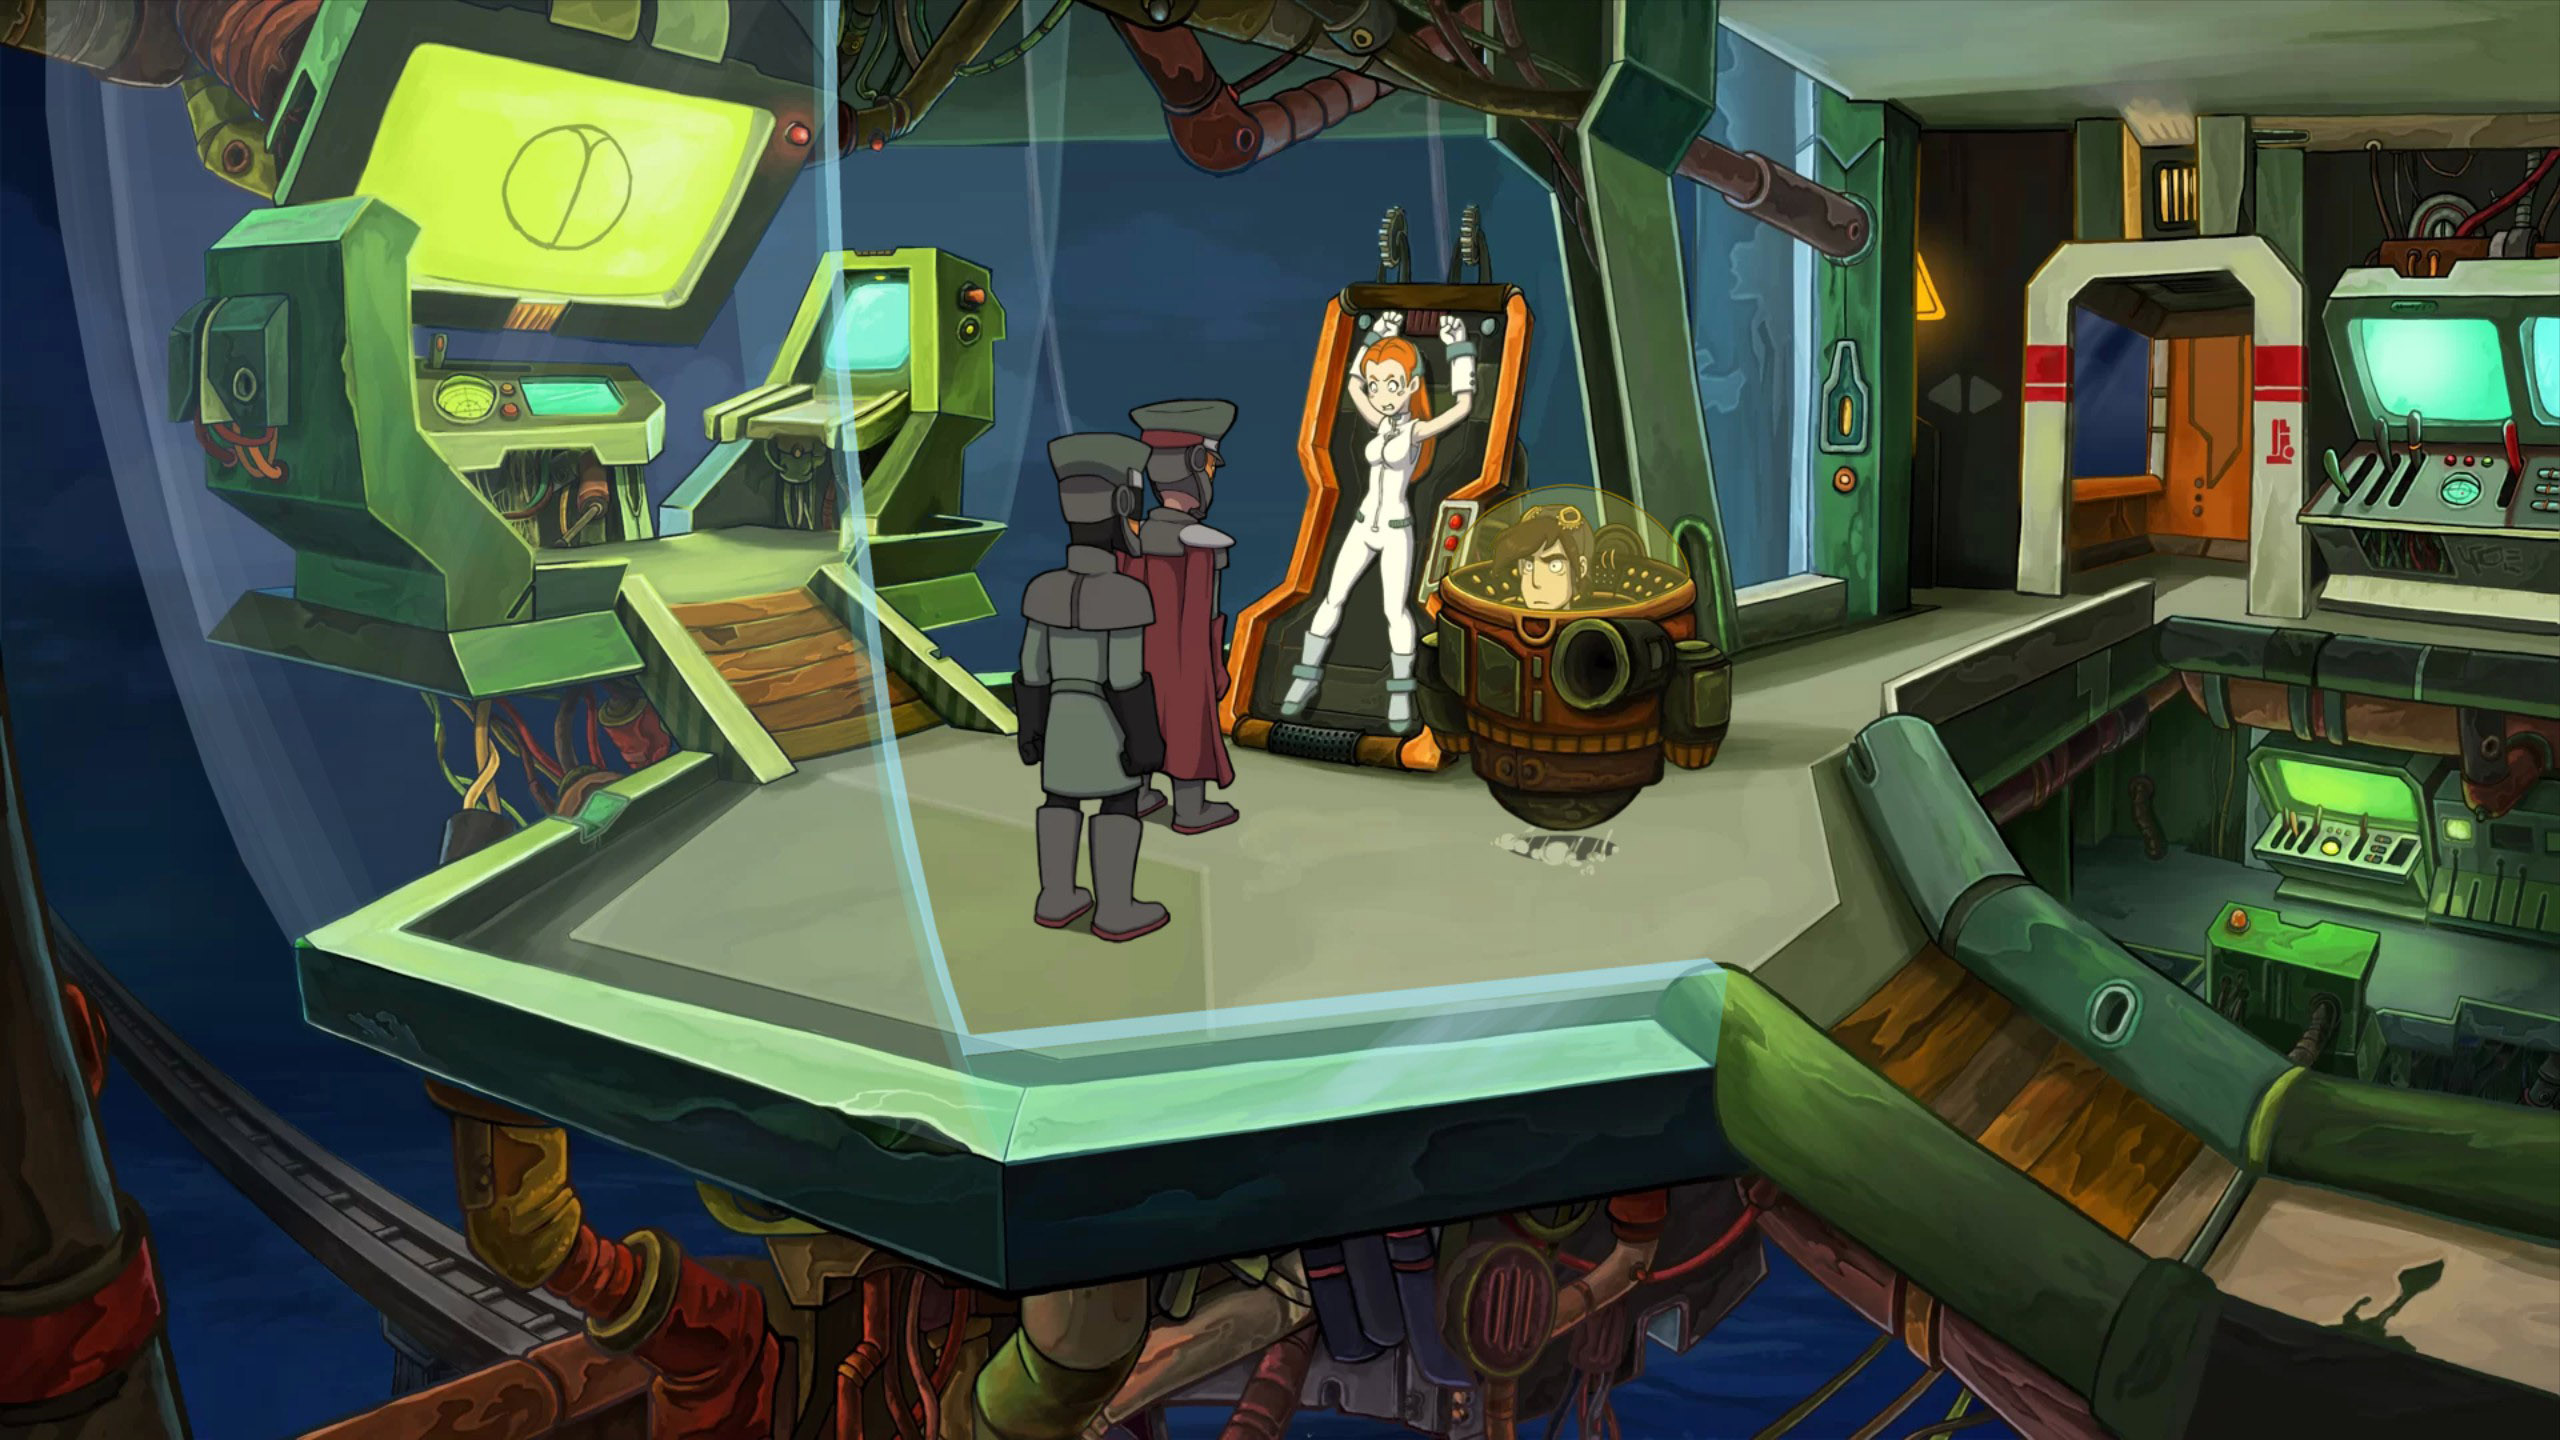 Goodbye Deponia Pics, Video Game Collection